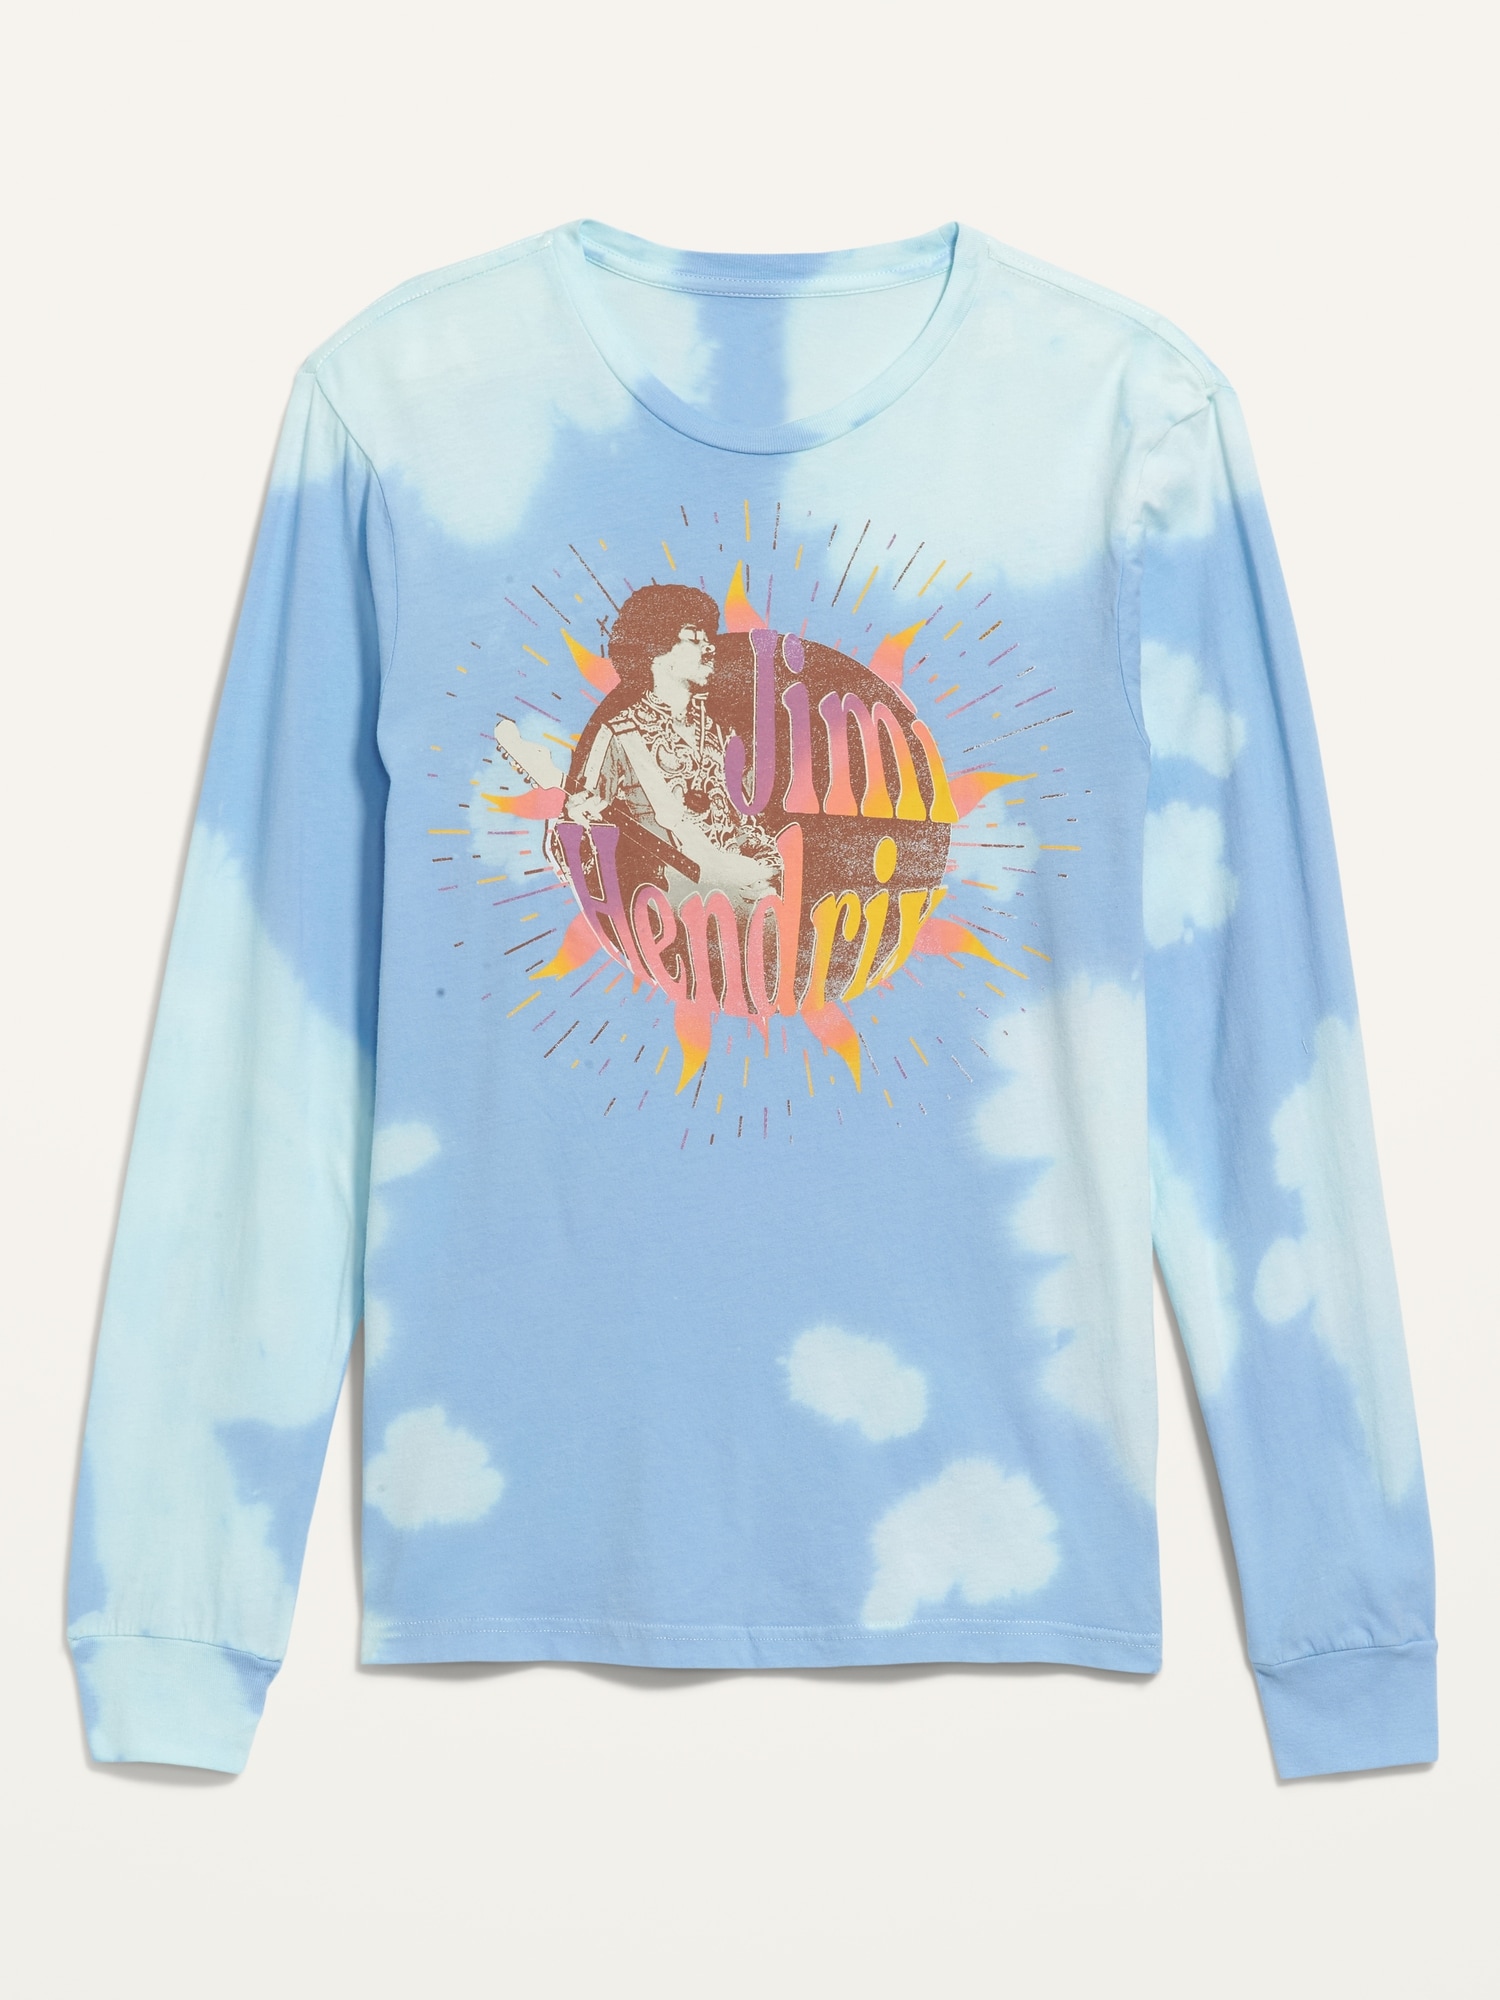 Jimi Hendrix™ Gender-Neutral Long-Sleeve T-Shirt for Adults | Old Navy